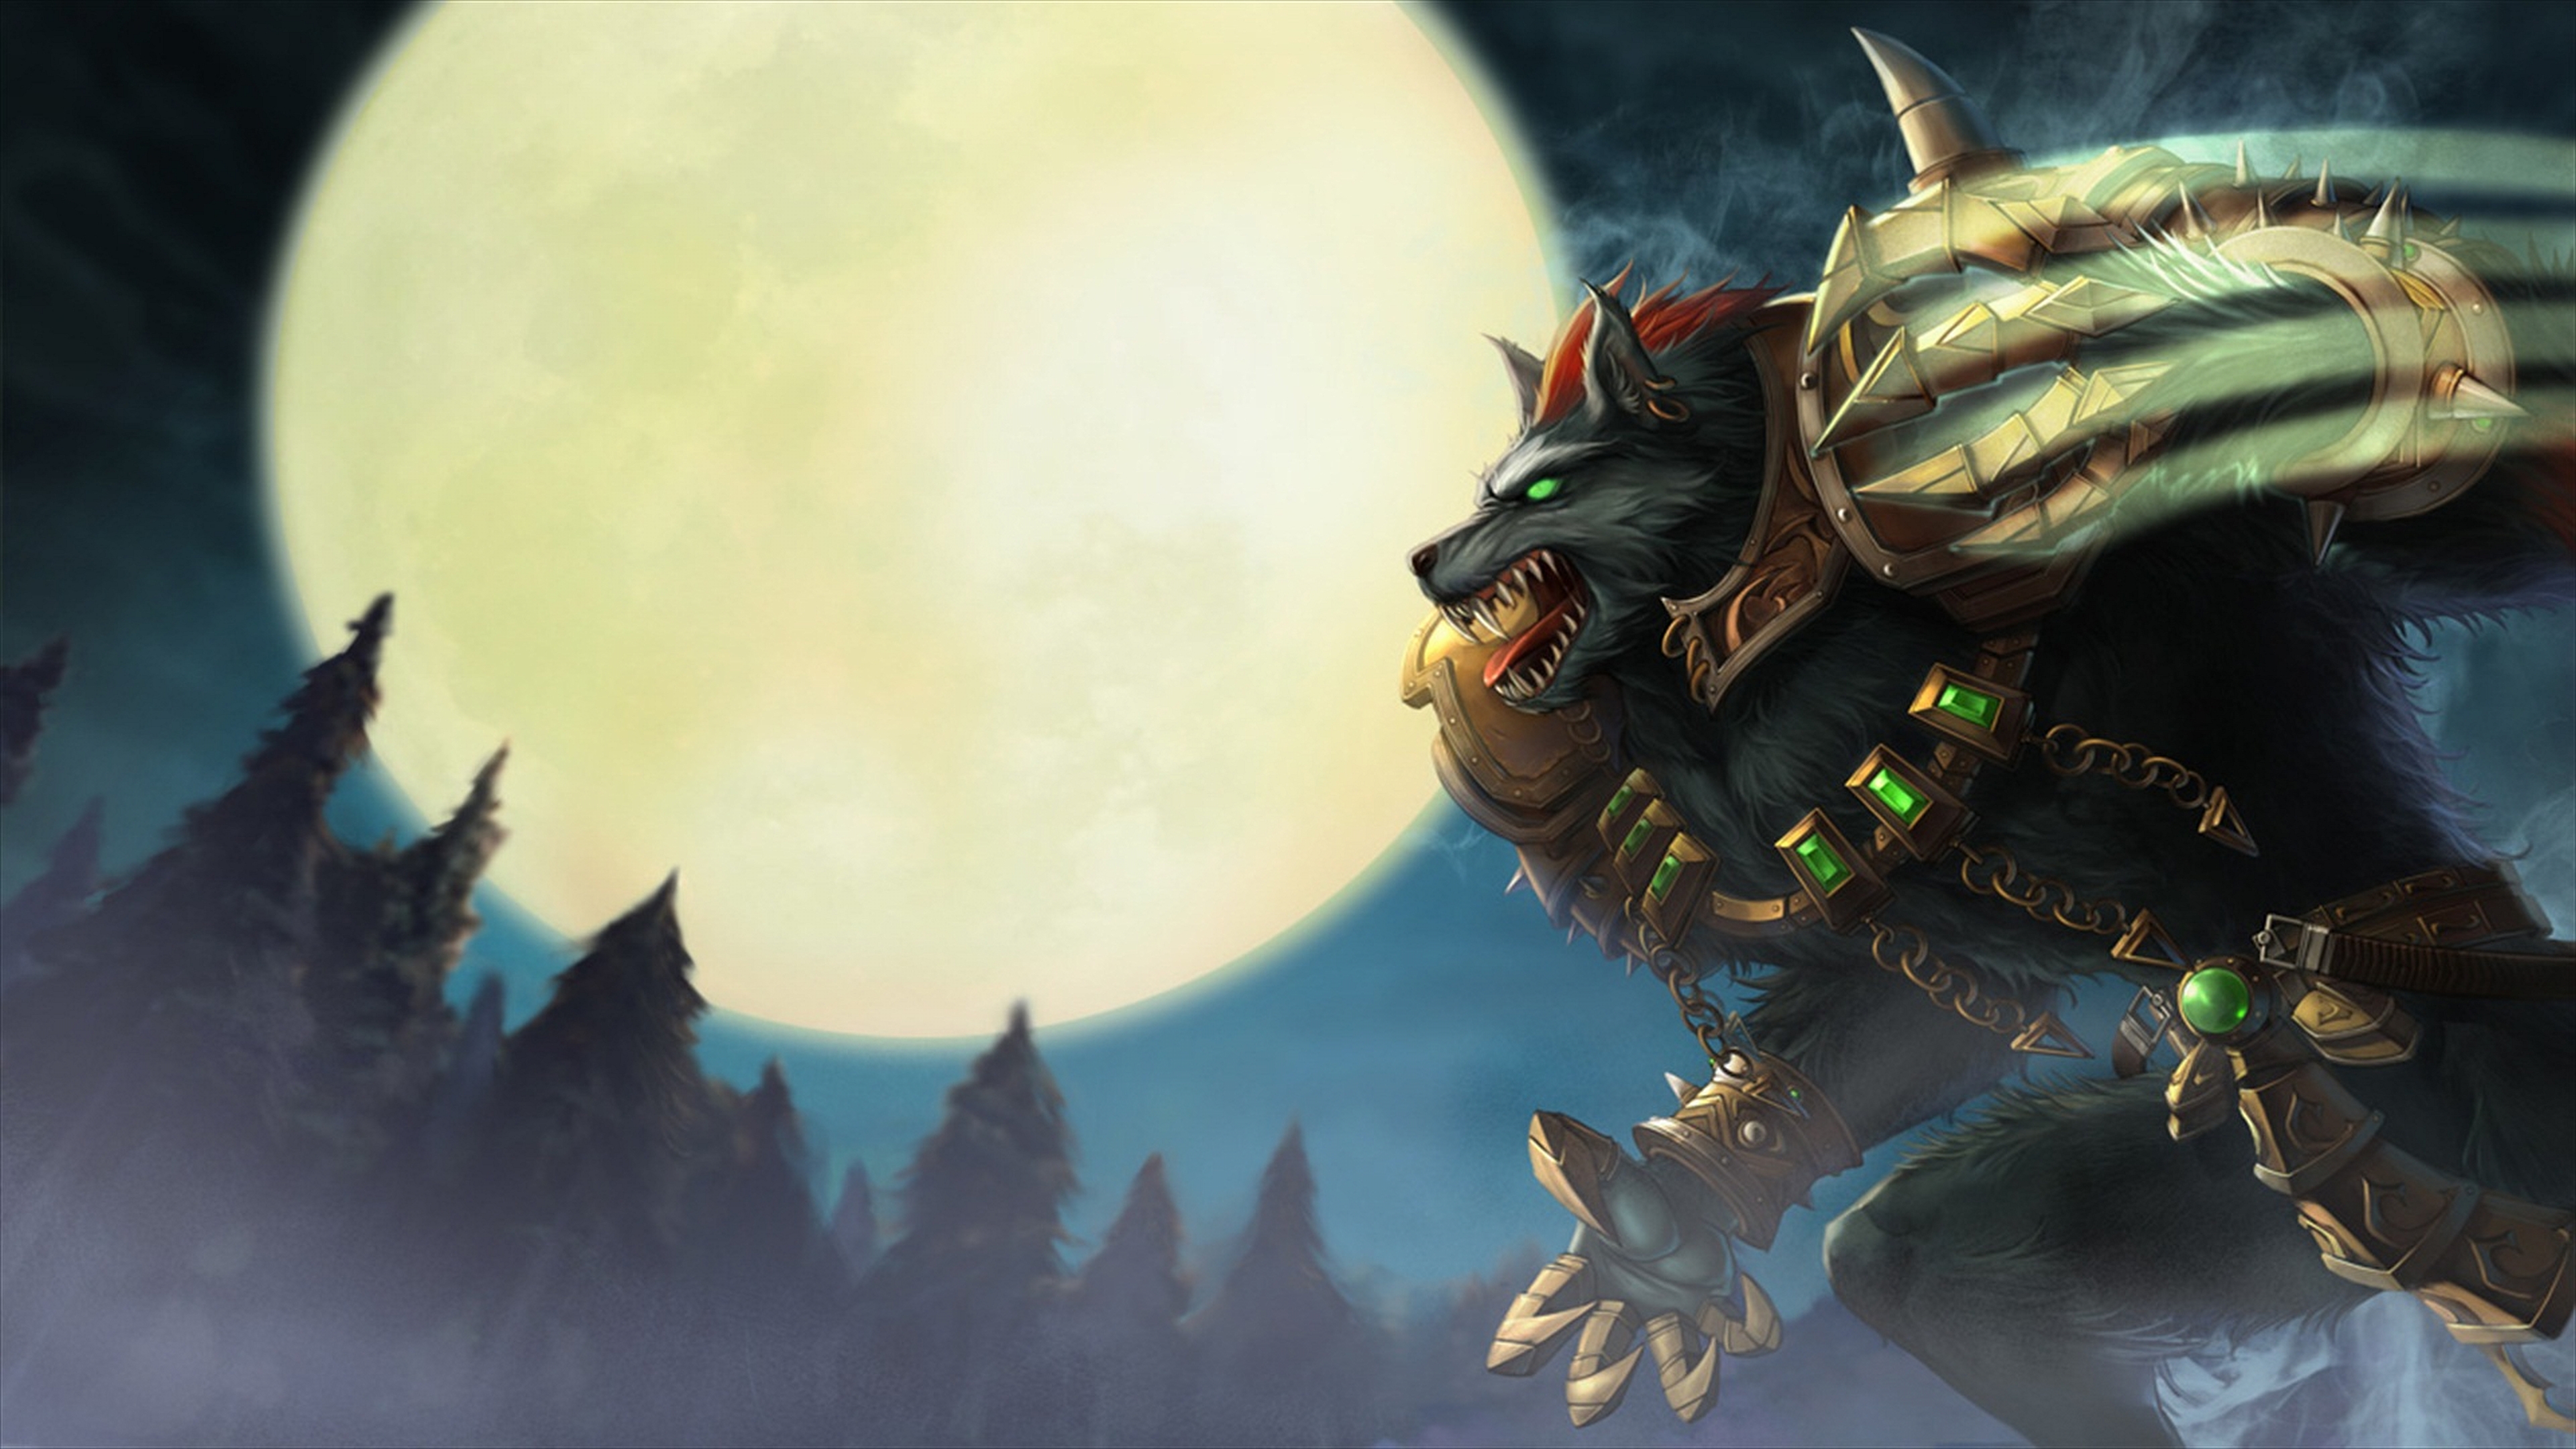 Warwick, fearsome champion from League of Legends, ready for battle in stunning 4K Ultra HD.